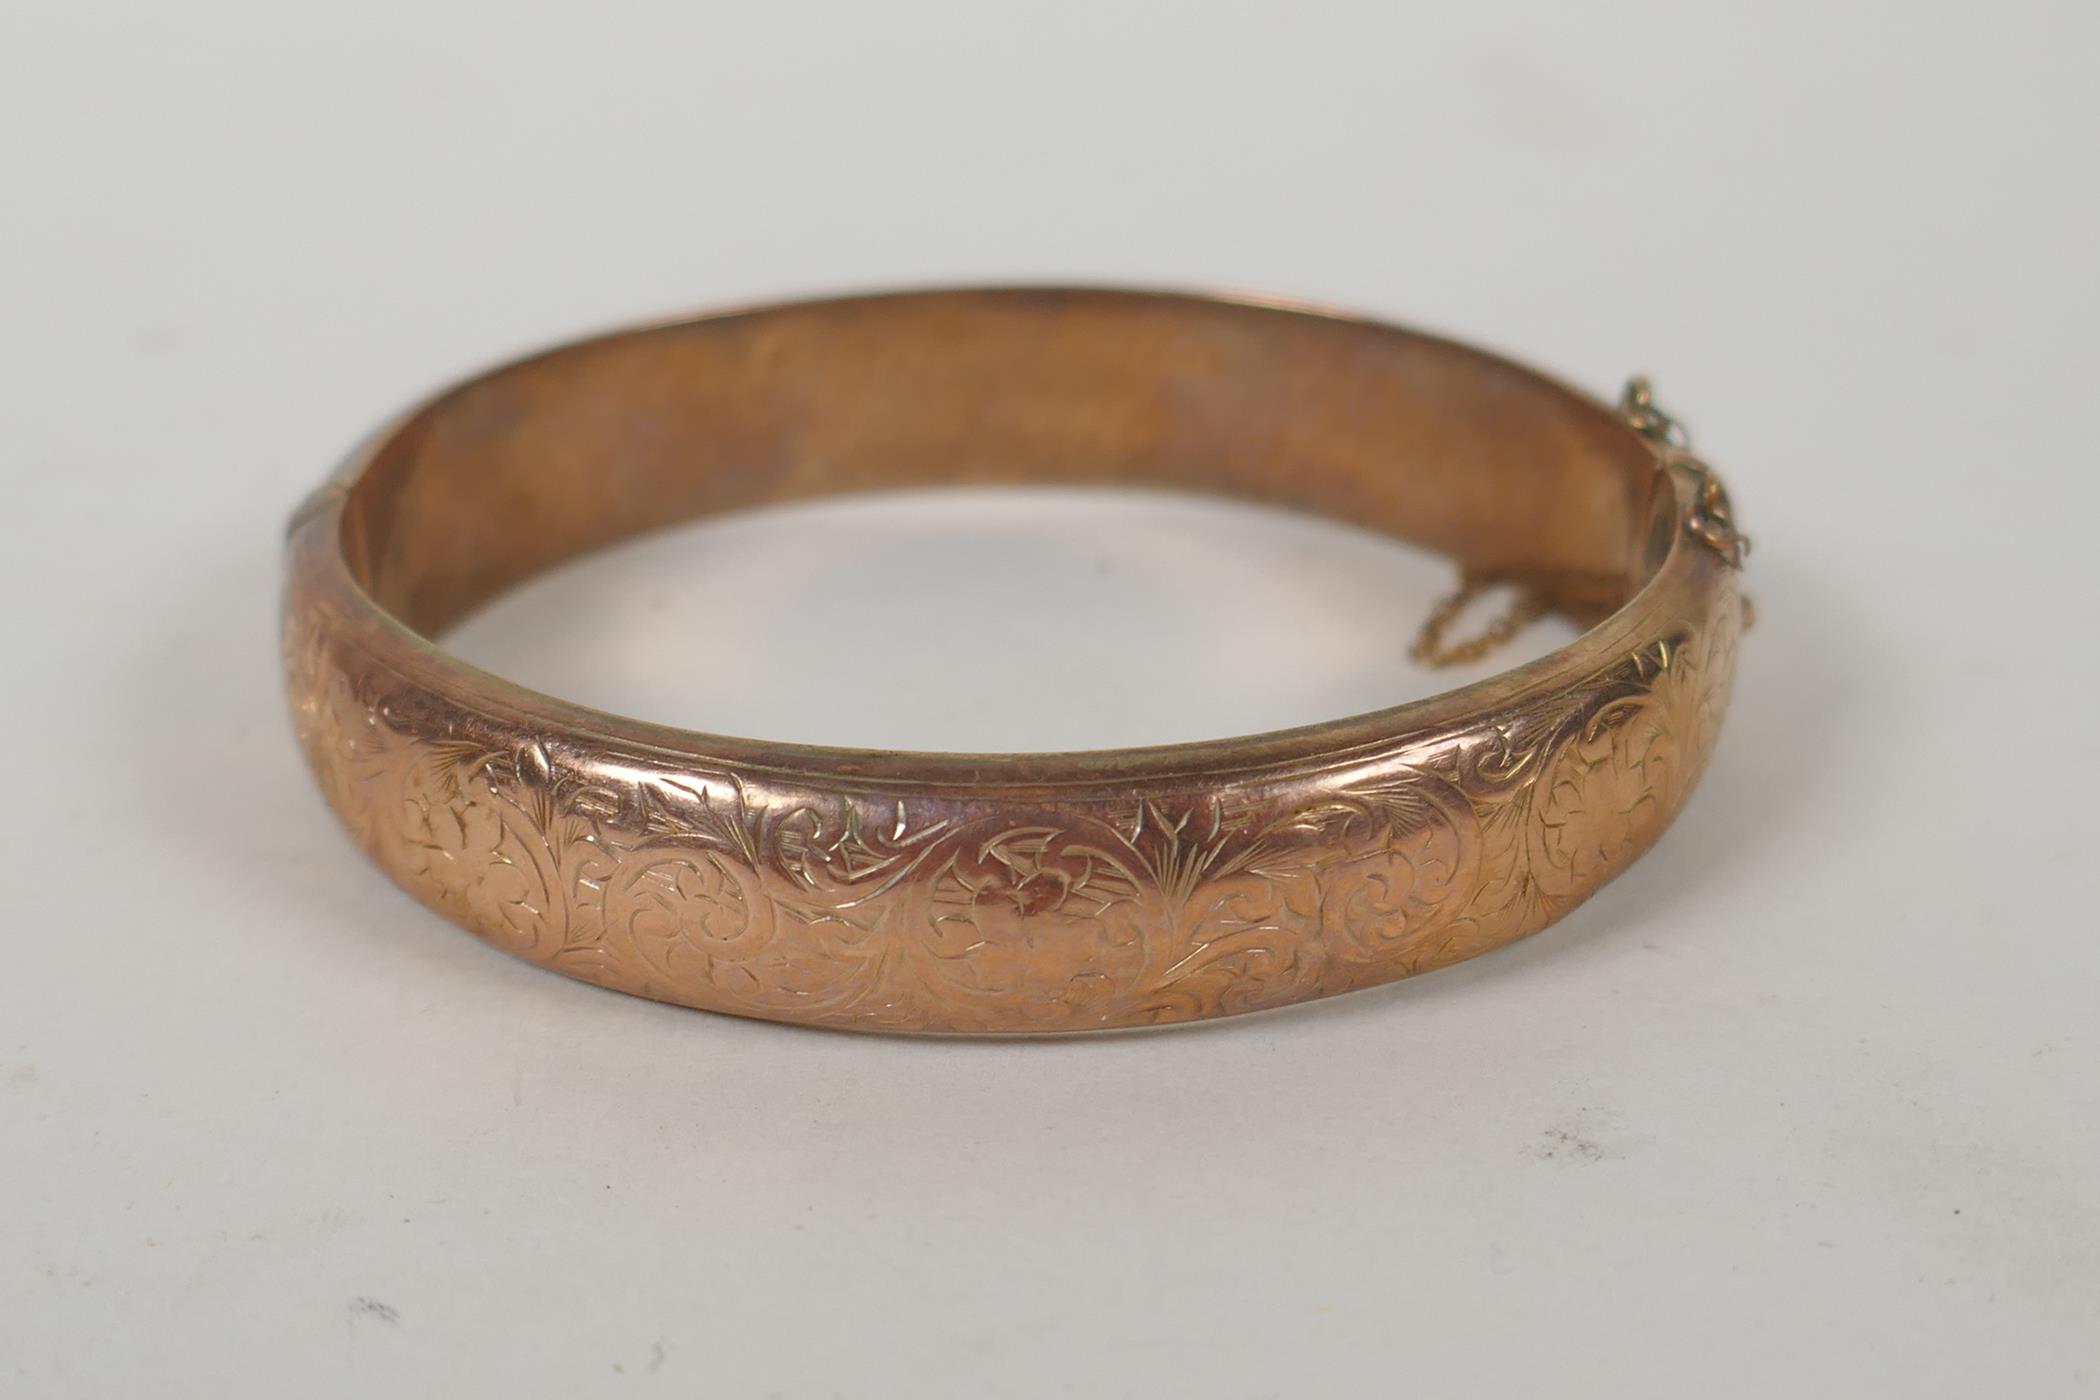 A 9ct gold bangle with scrolling decoration and inscription, 6 x 5.5cm, 14.9g